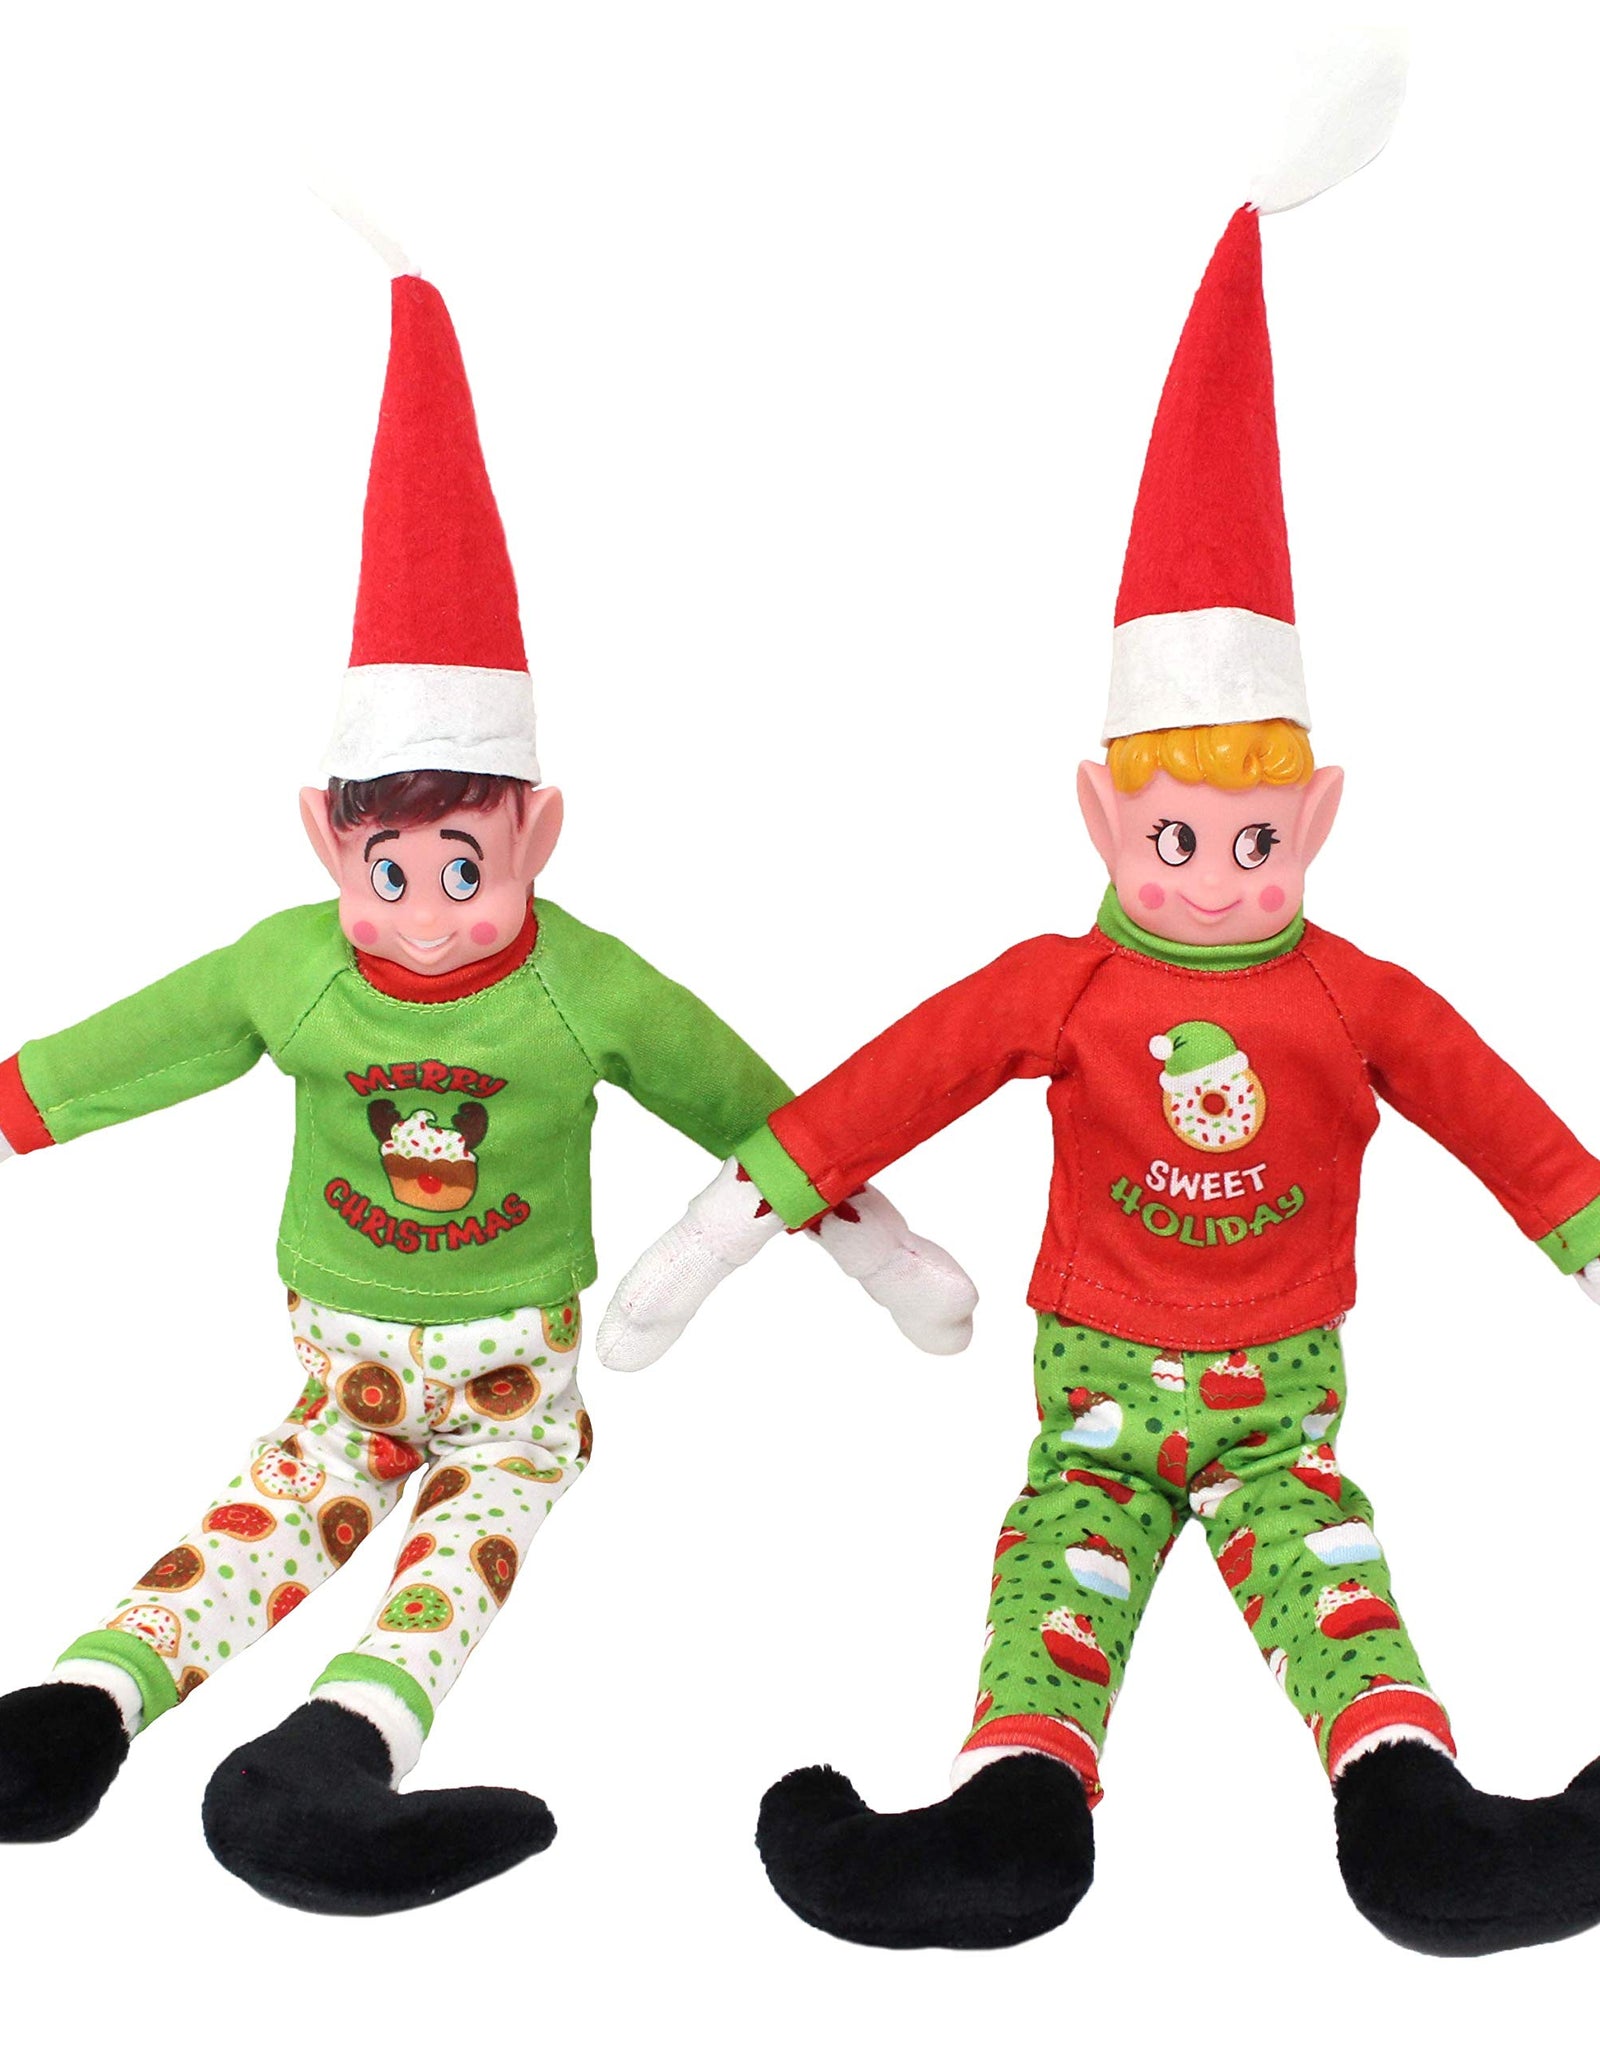 JOYIN 2 Packs Santa Couture Ugly Sweaters for Elf Doll, Cupcakes and Donut Be Naughty Pjs, Green and Red , Festive Flannel PJ's